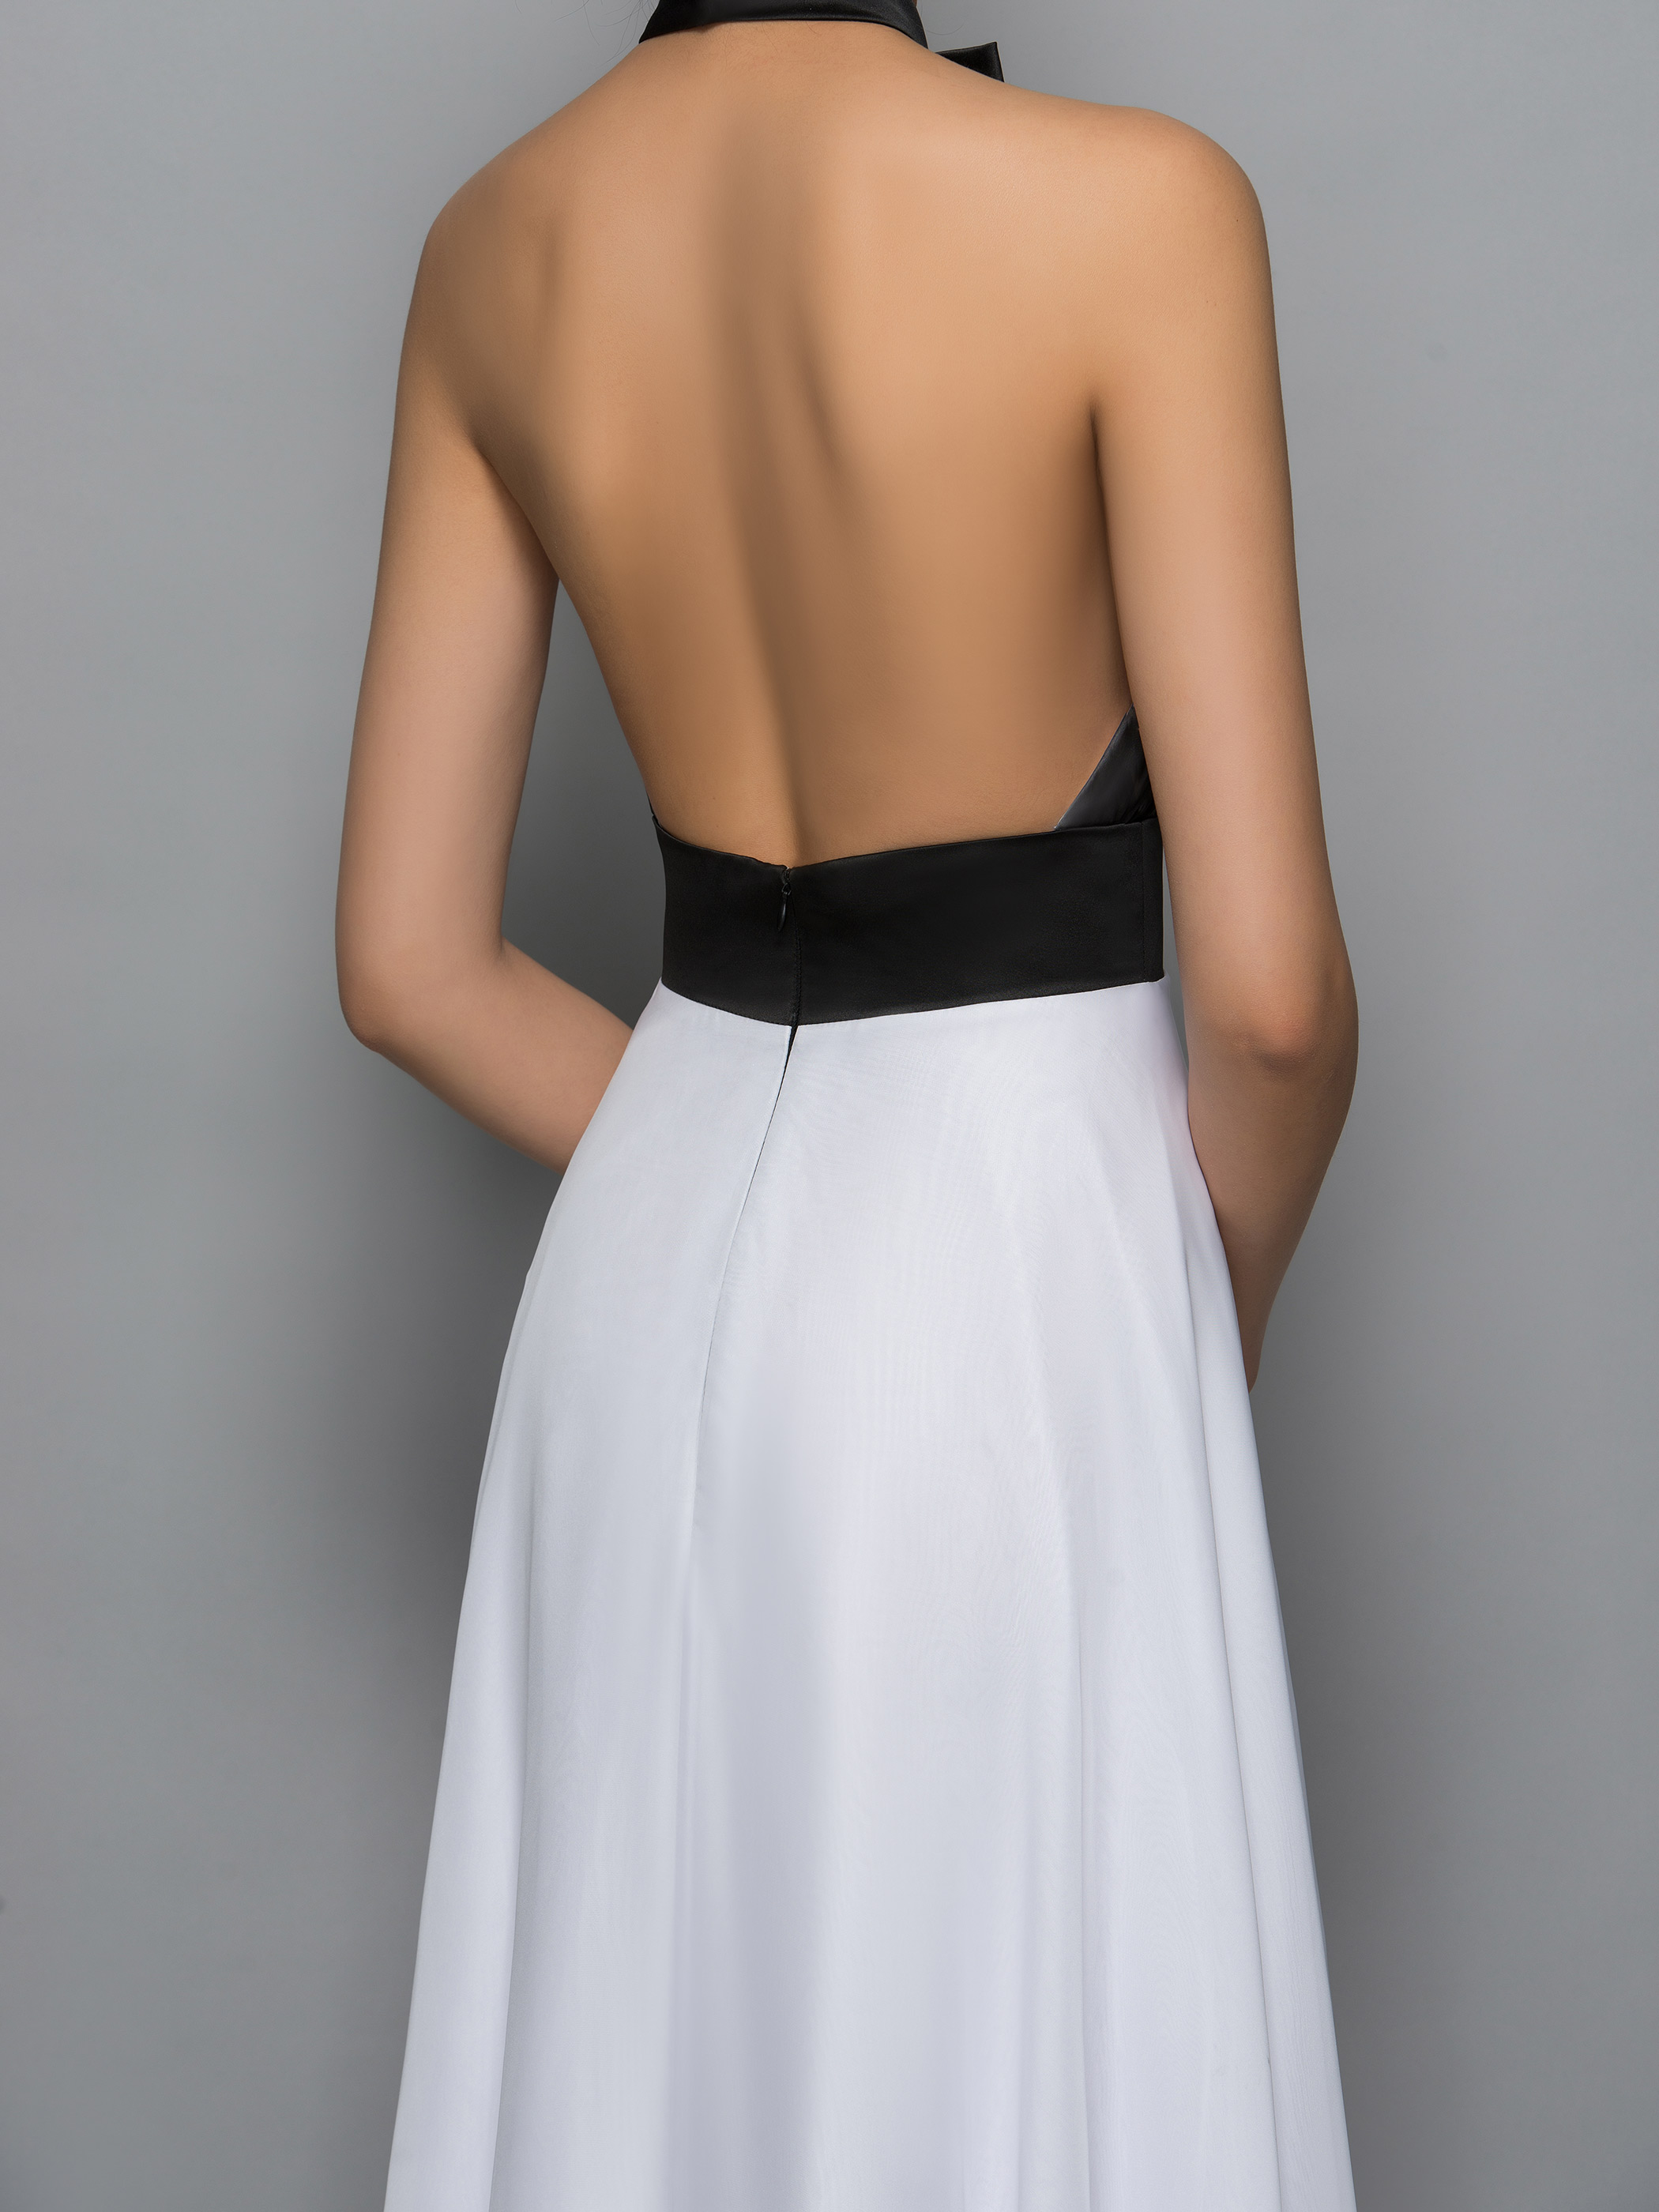 Ericdress Halter Bowknot High Low Backless Cocktail Dress